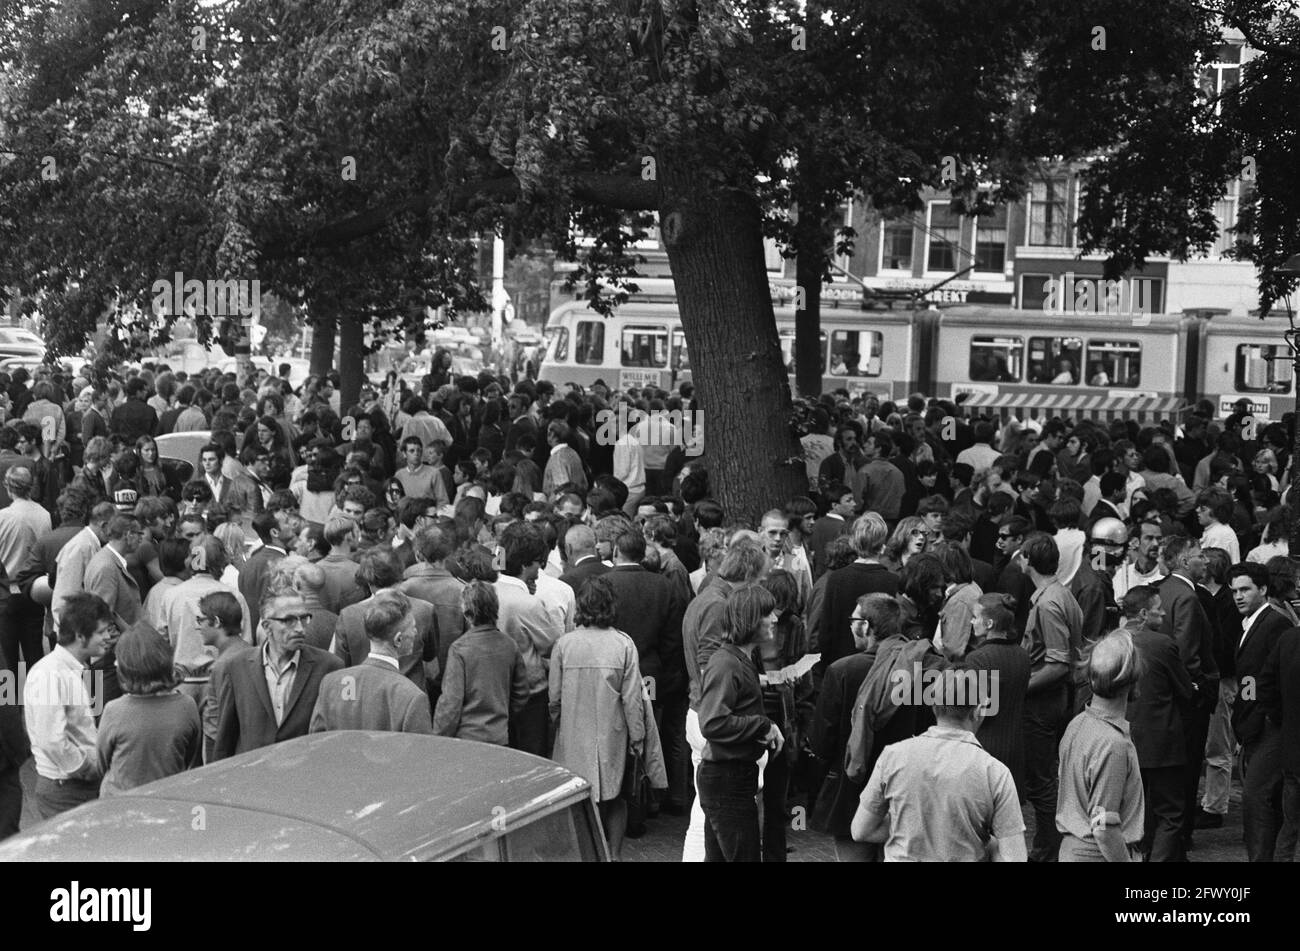 Protest demonstration students and workers lawsuits against Maagdenhuis occupiers from Westermarkt Amsterdam, procession with banner, June 12, 1969, A Stock Photo